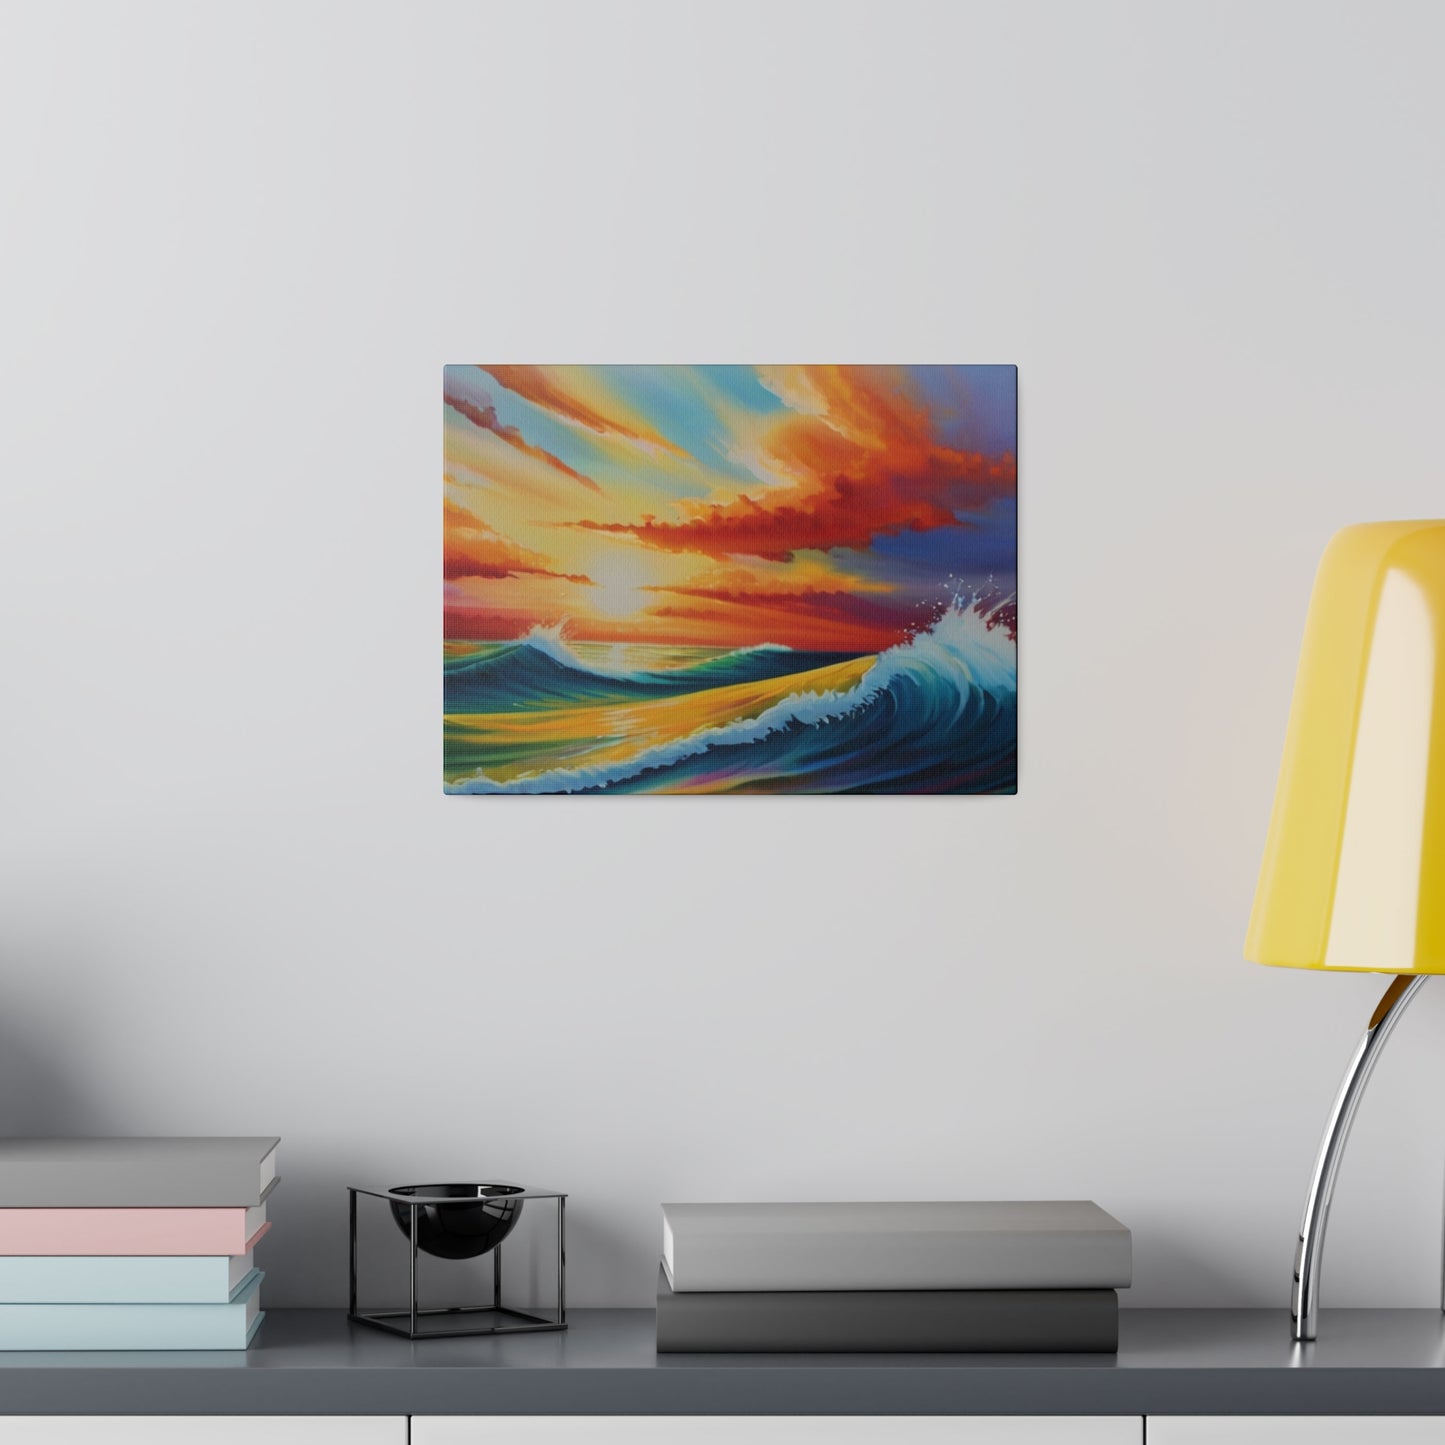 Sunset Among Waves - Matte Canvas, Stretched, 0.75"